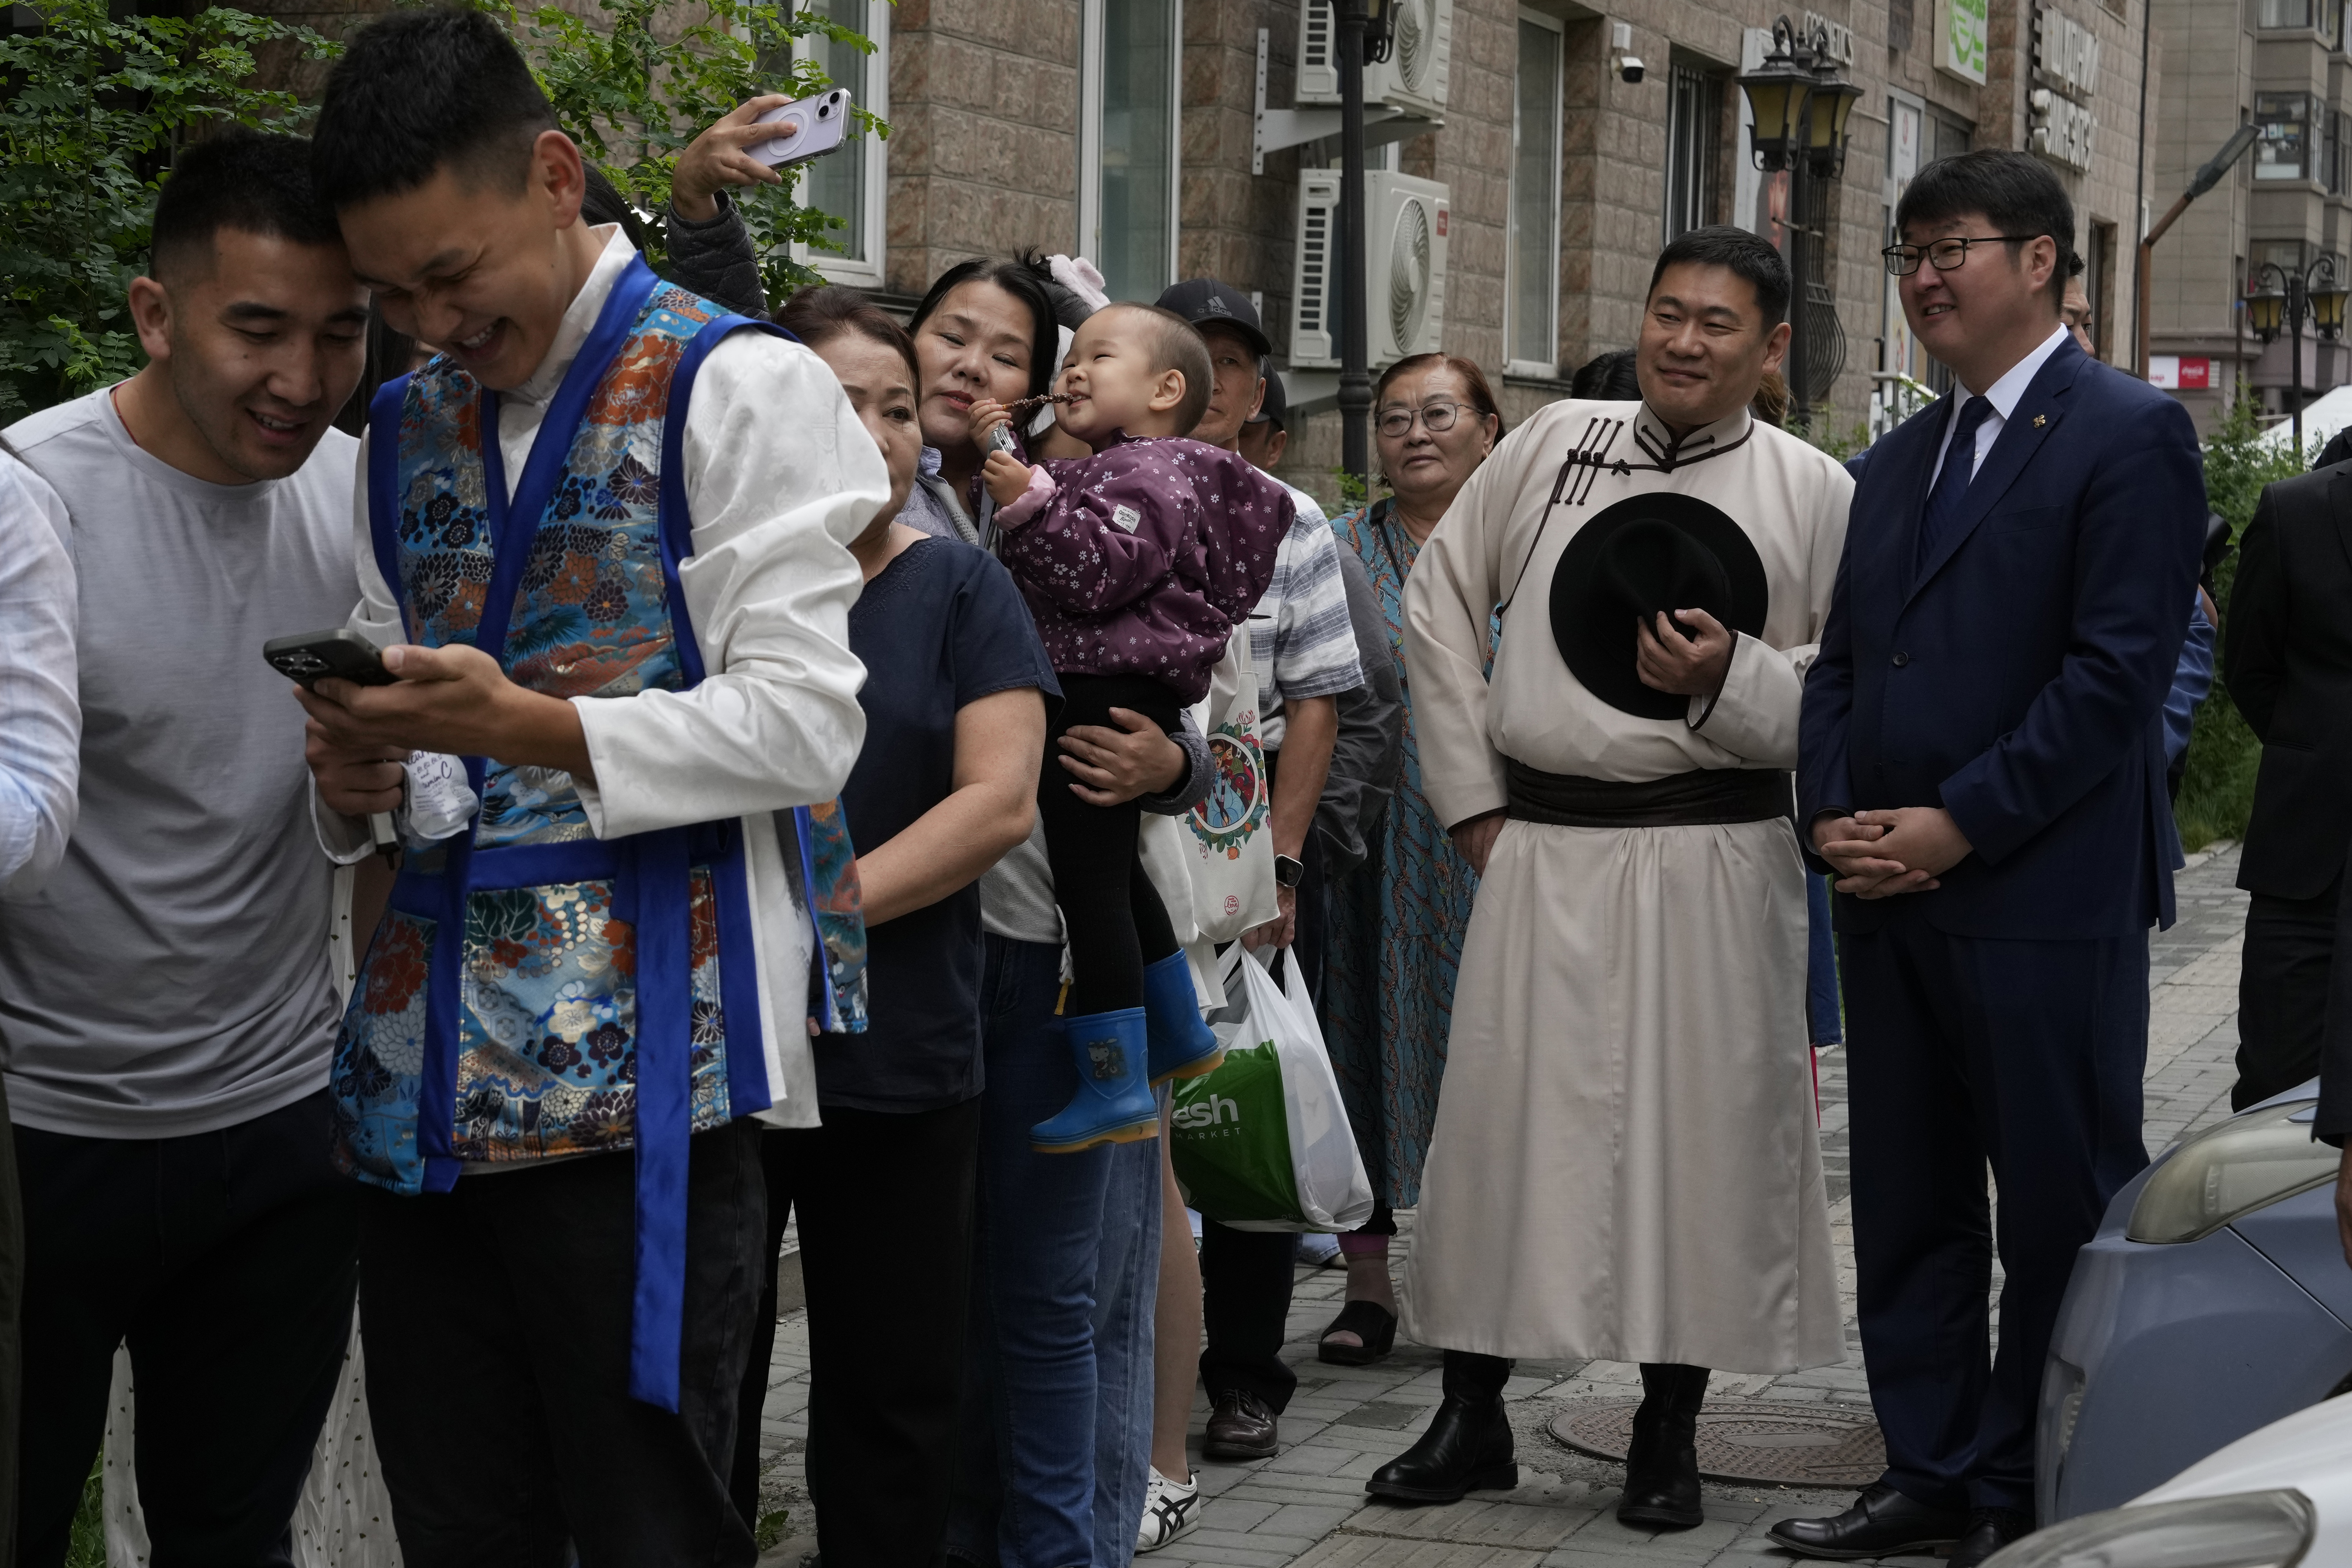 FILE - Mongolian Prime Minister Oyun-Erdene Luvsannamsrai, second from right, dressed in Mongolian traditional garment call deel, reacts as a woman takes a selfie with her child as he waited in line outside a polling station to vote in Ulaanbataar, Mongolia, June 28, 2024. The ruling People's Party has tried to reposition itself in response to the public discontent. It appointed the relatively young prime minister, Oyun-Erdene Luvsannamsrai, now 44, with a master's degree from Harvard University in 2021. (AP Photo/Ng Han Guan, File)